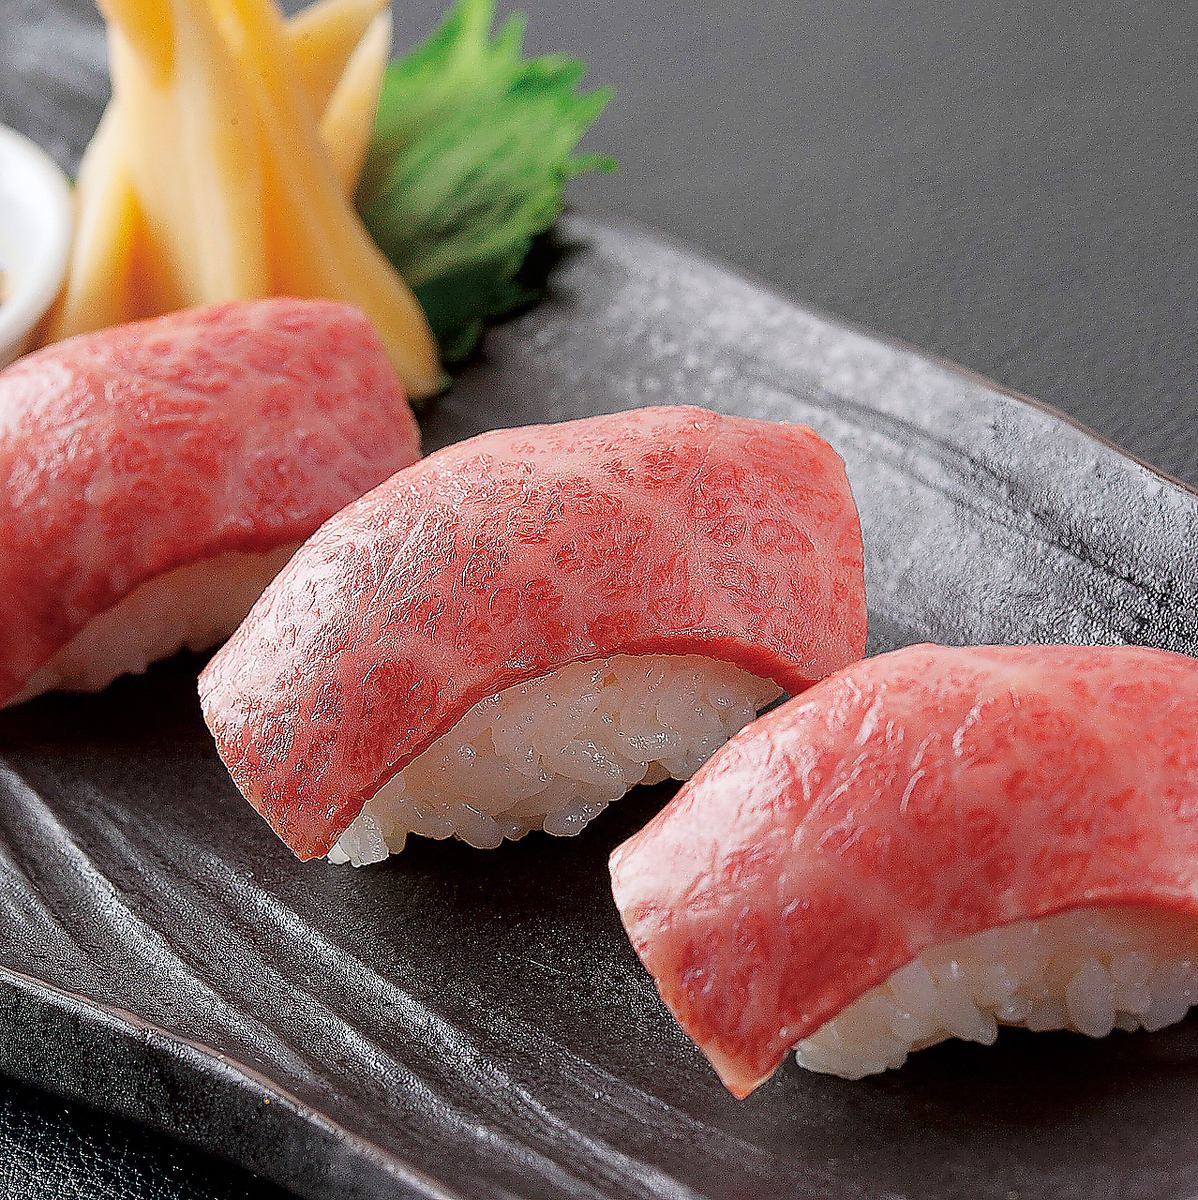 Enjoy the Japanese black beef and its rare parts that have been matured to bring out the deliciousness!